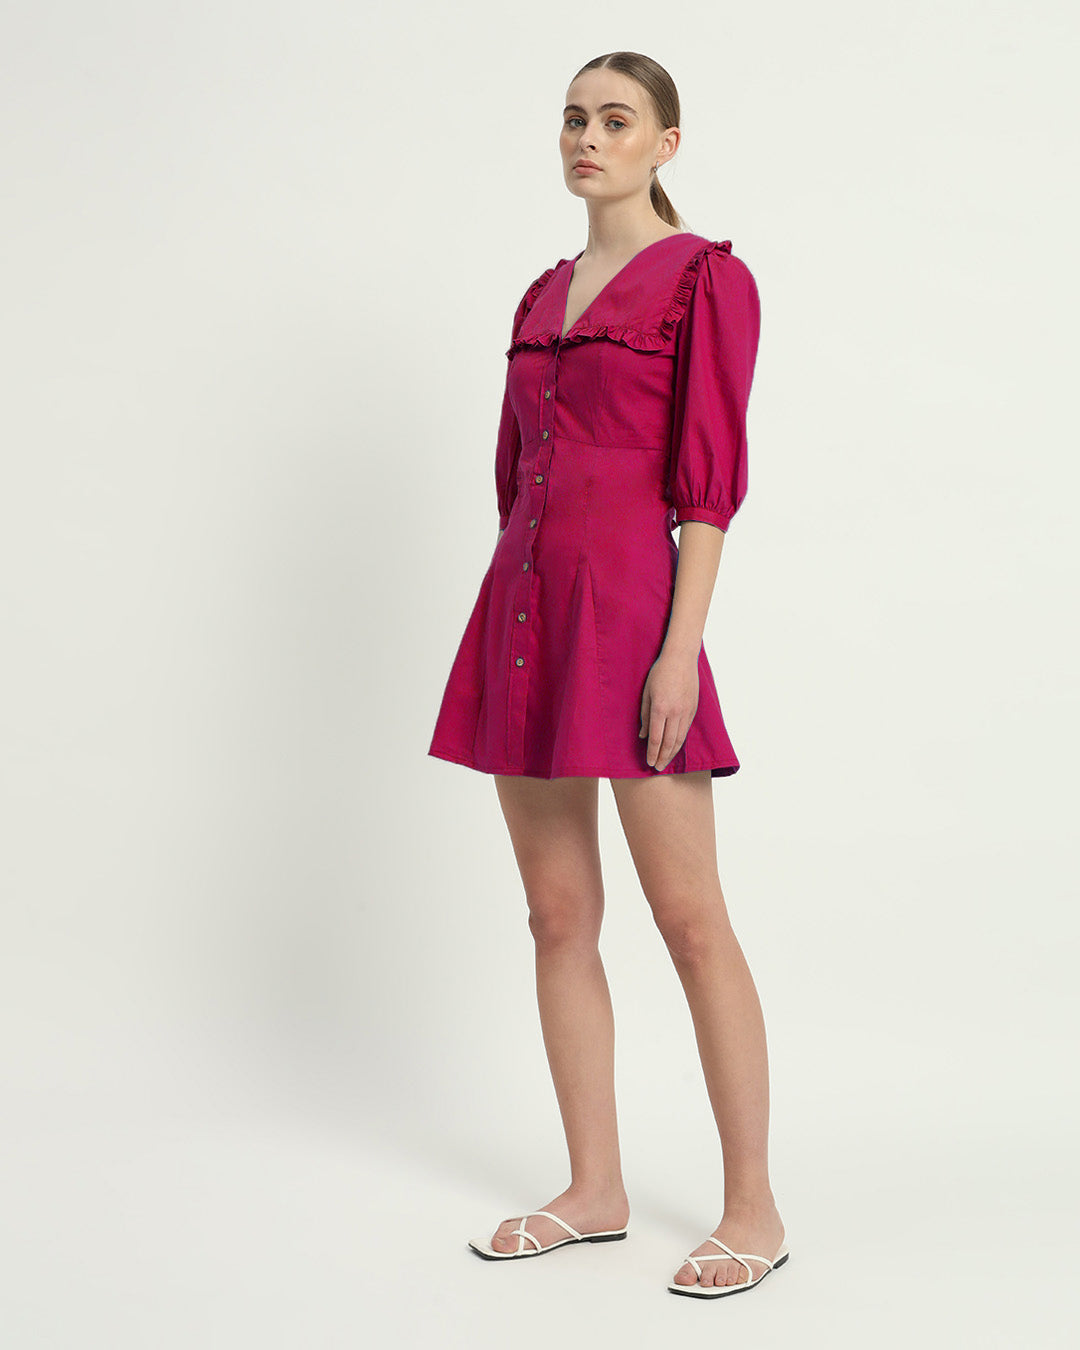 The Berry Isabela Cotton Dress